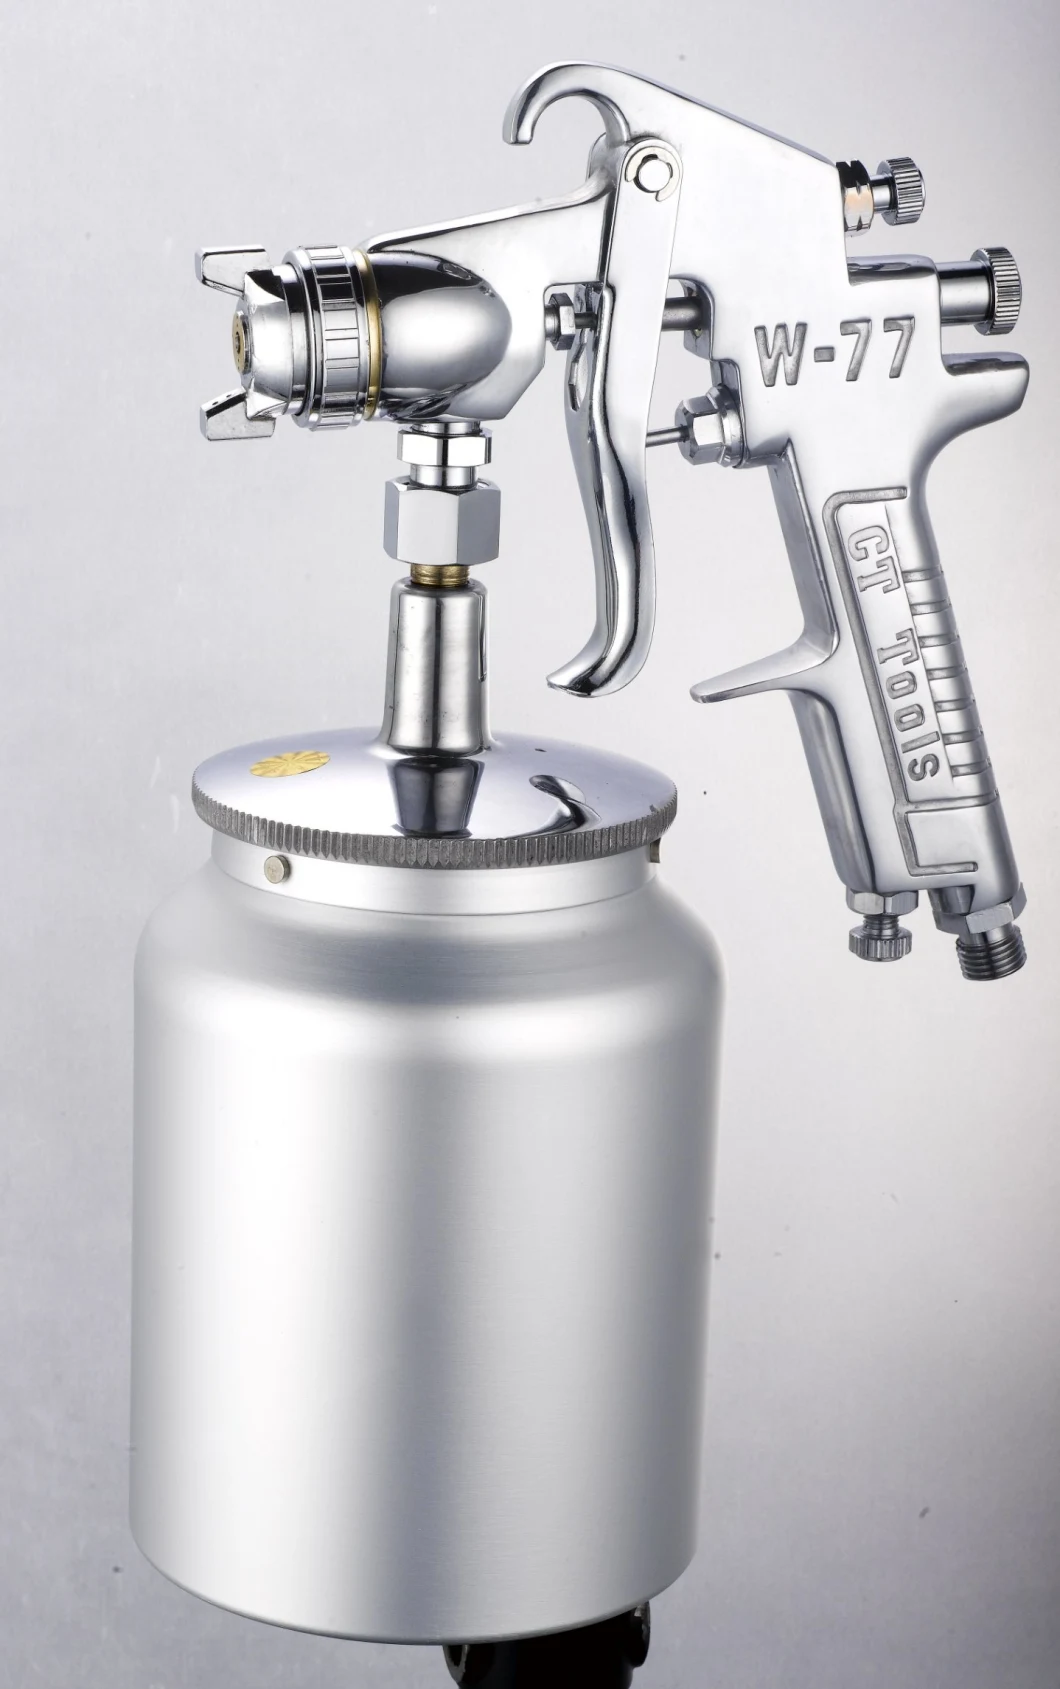 W-77 Full Size Japanese Style Industrial Air Paint Spray Guns